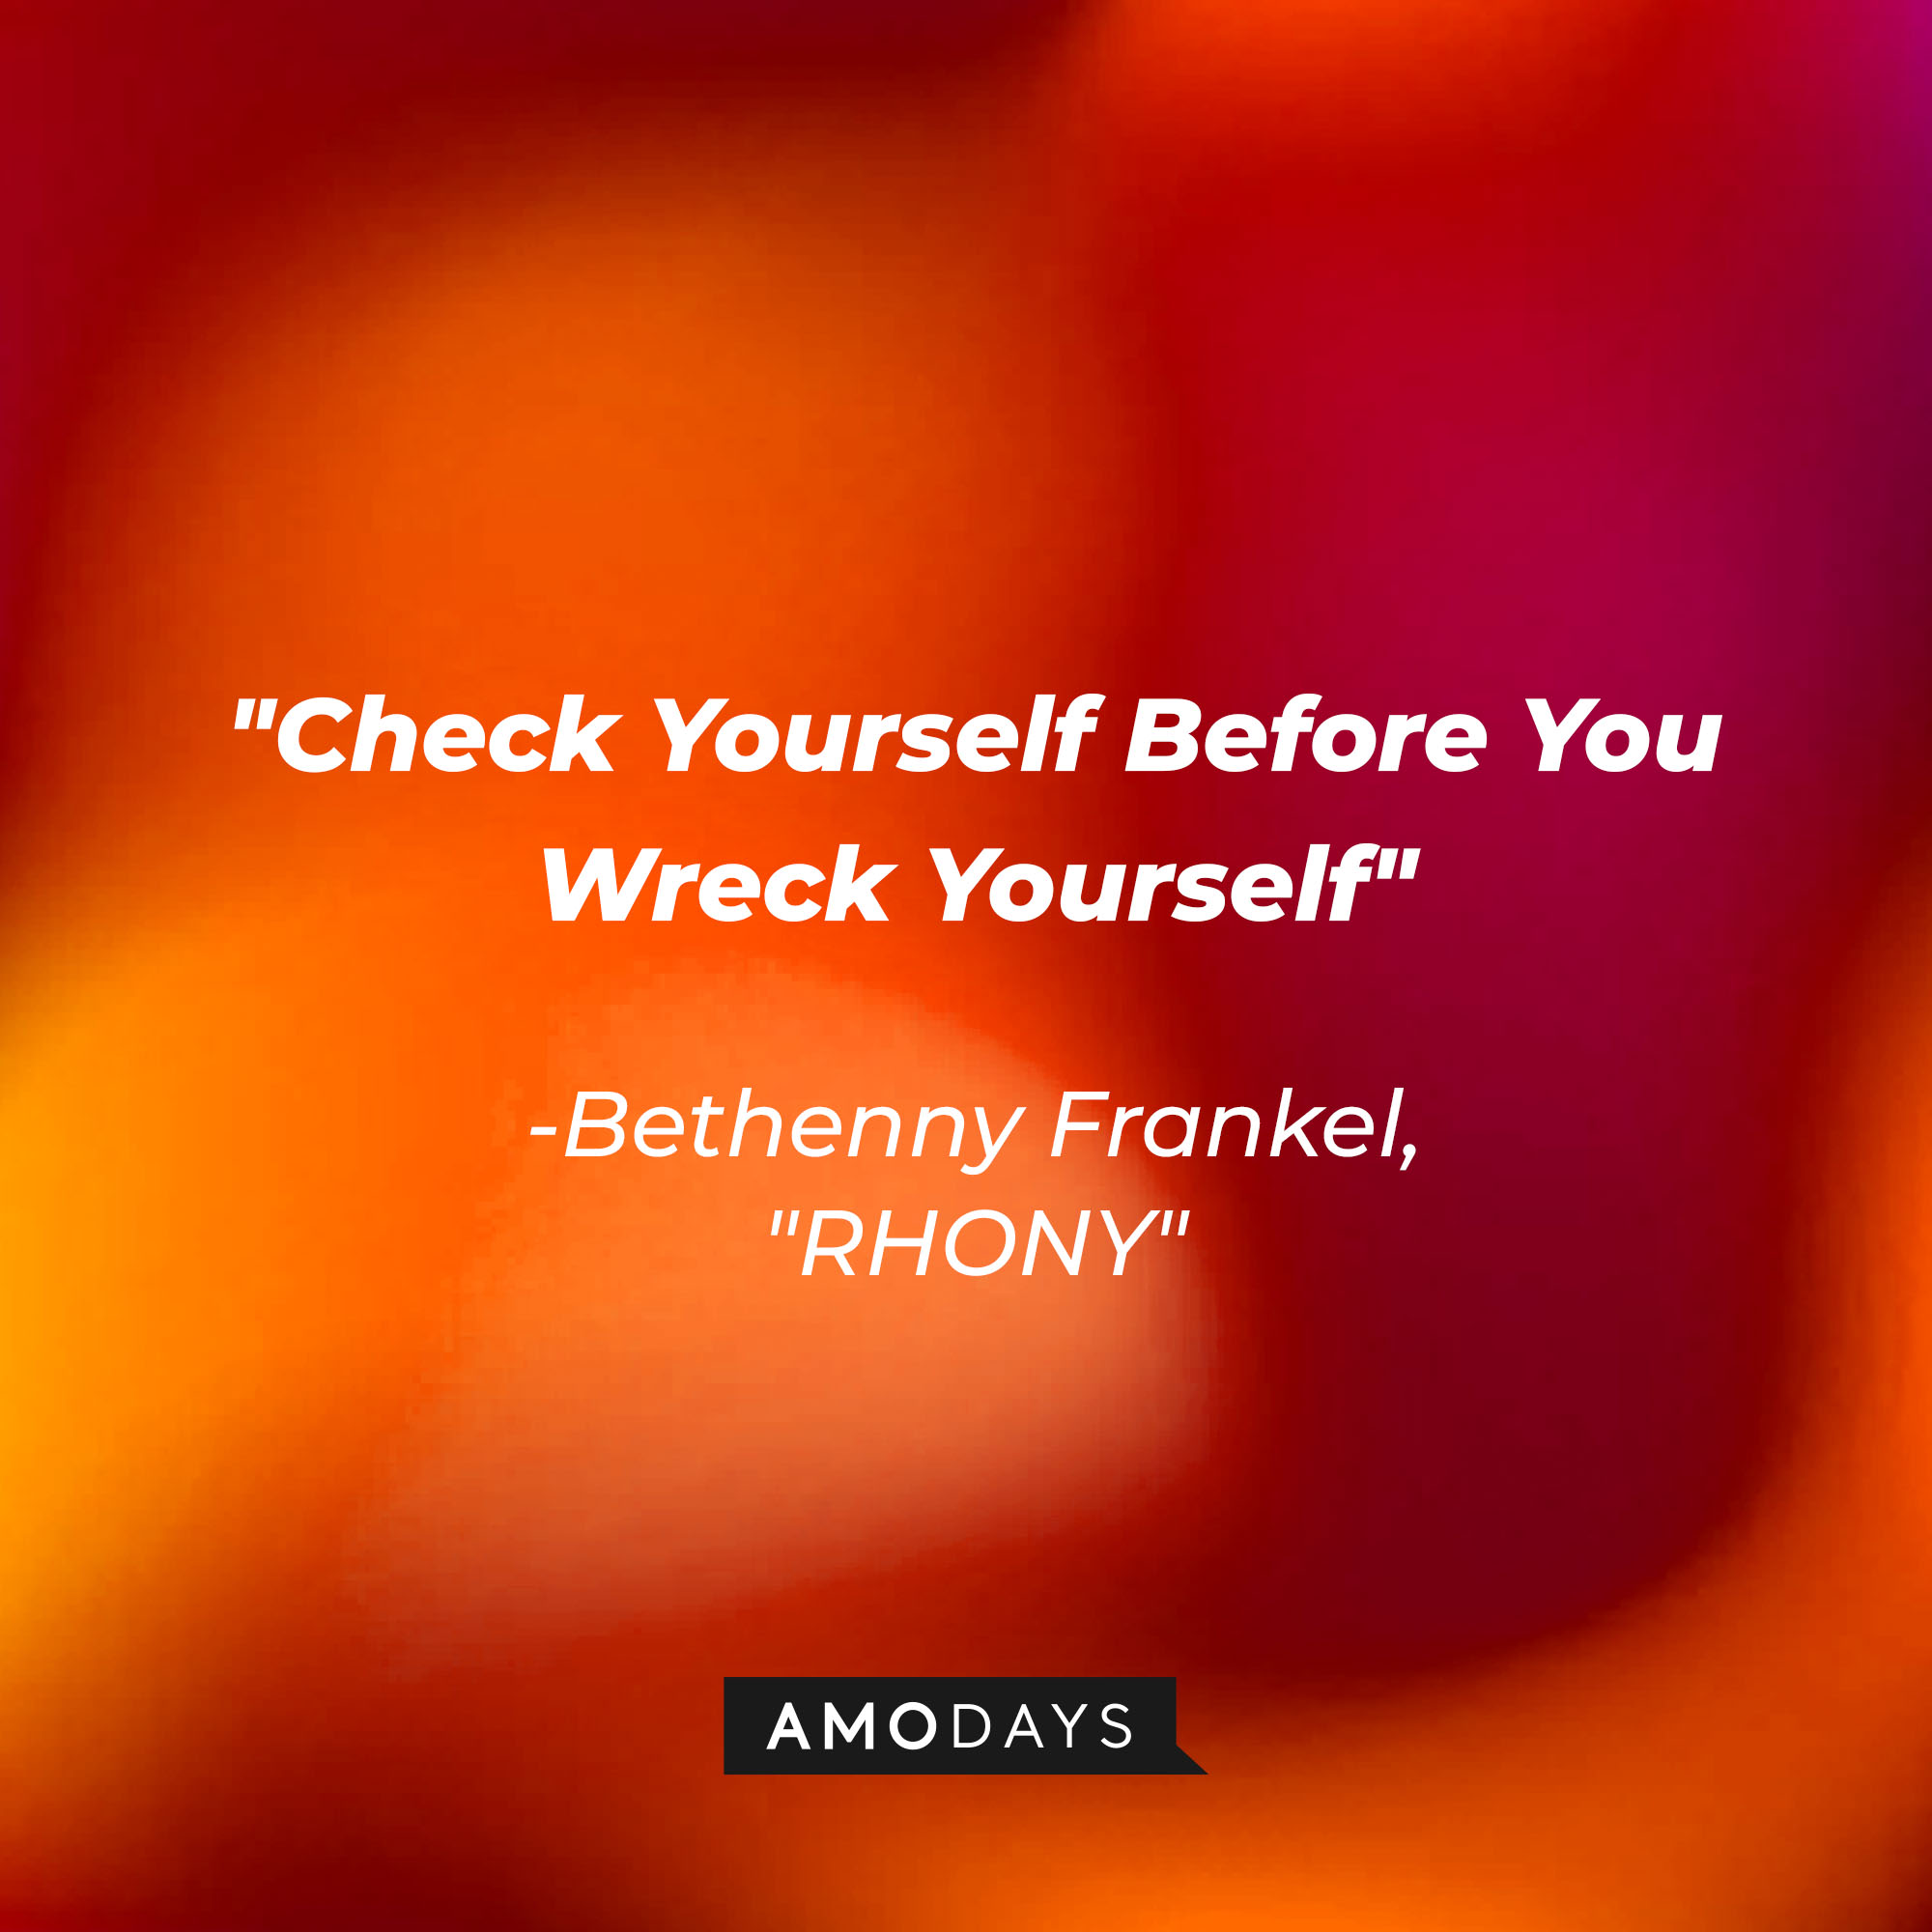 Bethenny Frankel's quote: " Check Yourself Before You Wreck Yourself" | Source: Amodays